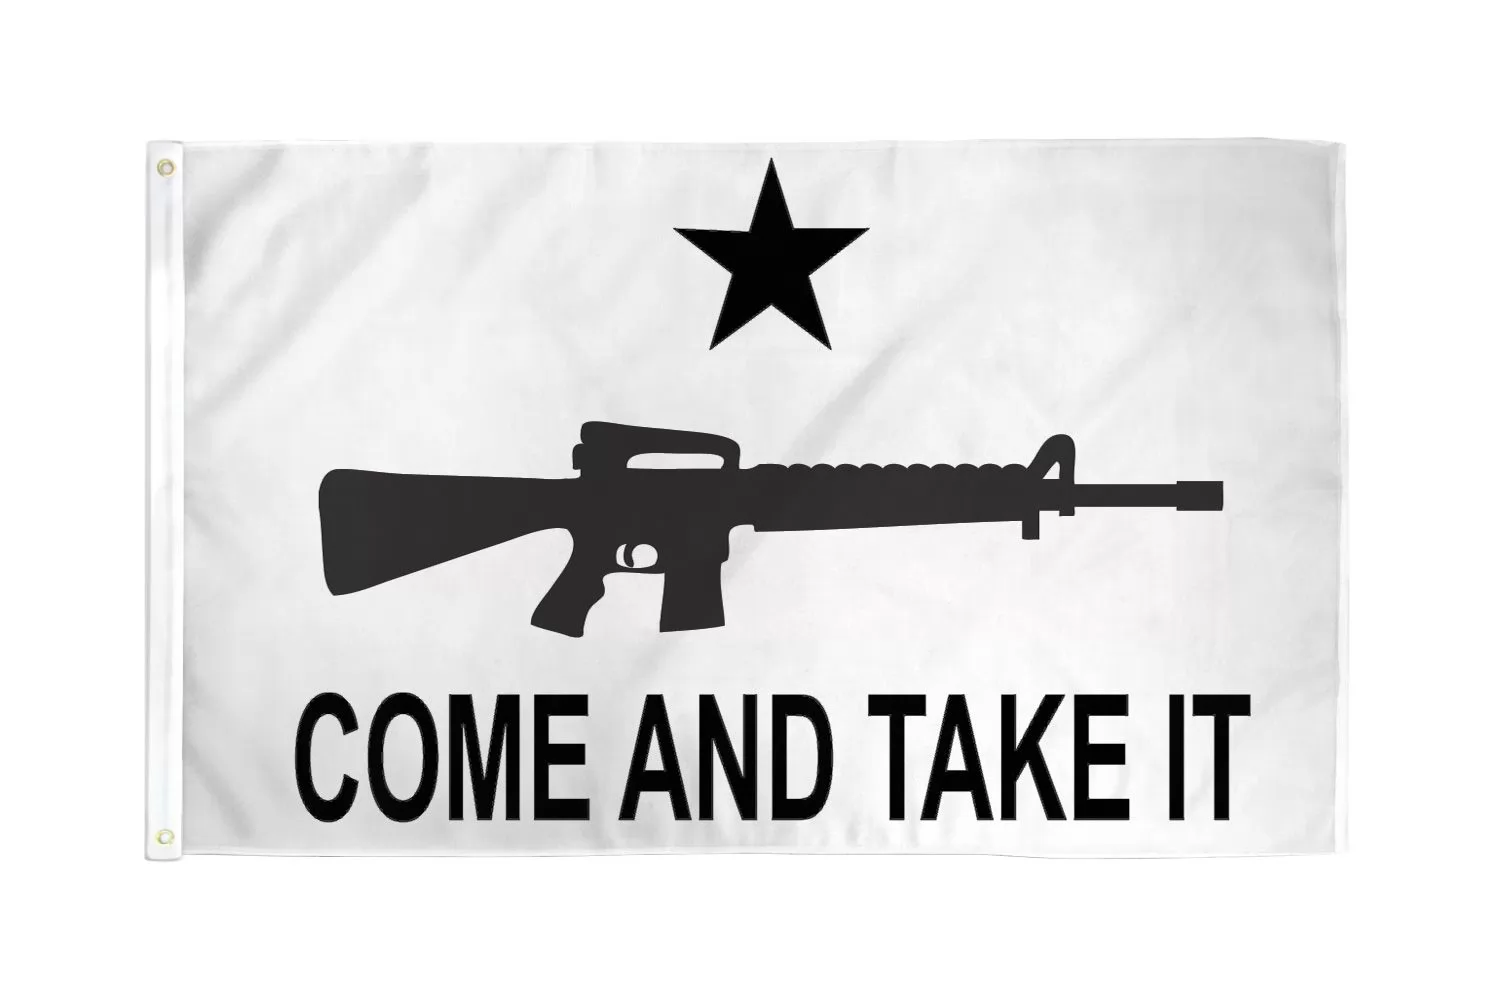 Homissor  M-4 Gonzales Come and Take It Flag - Bright Color and Fade Proof - Canvas Header and Double Stitched - M4 Carbine Flags Polyester with Brass